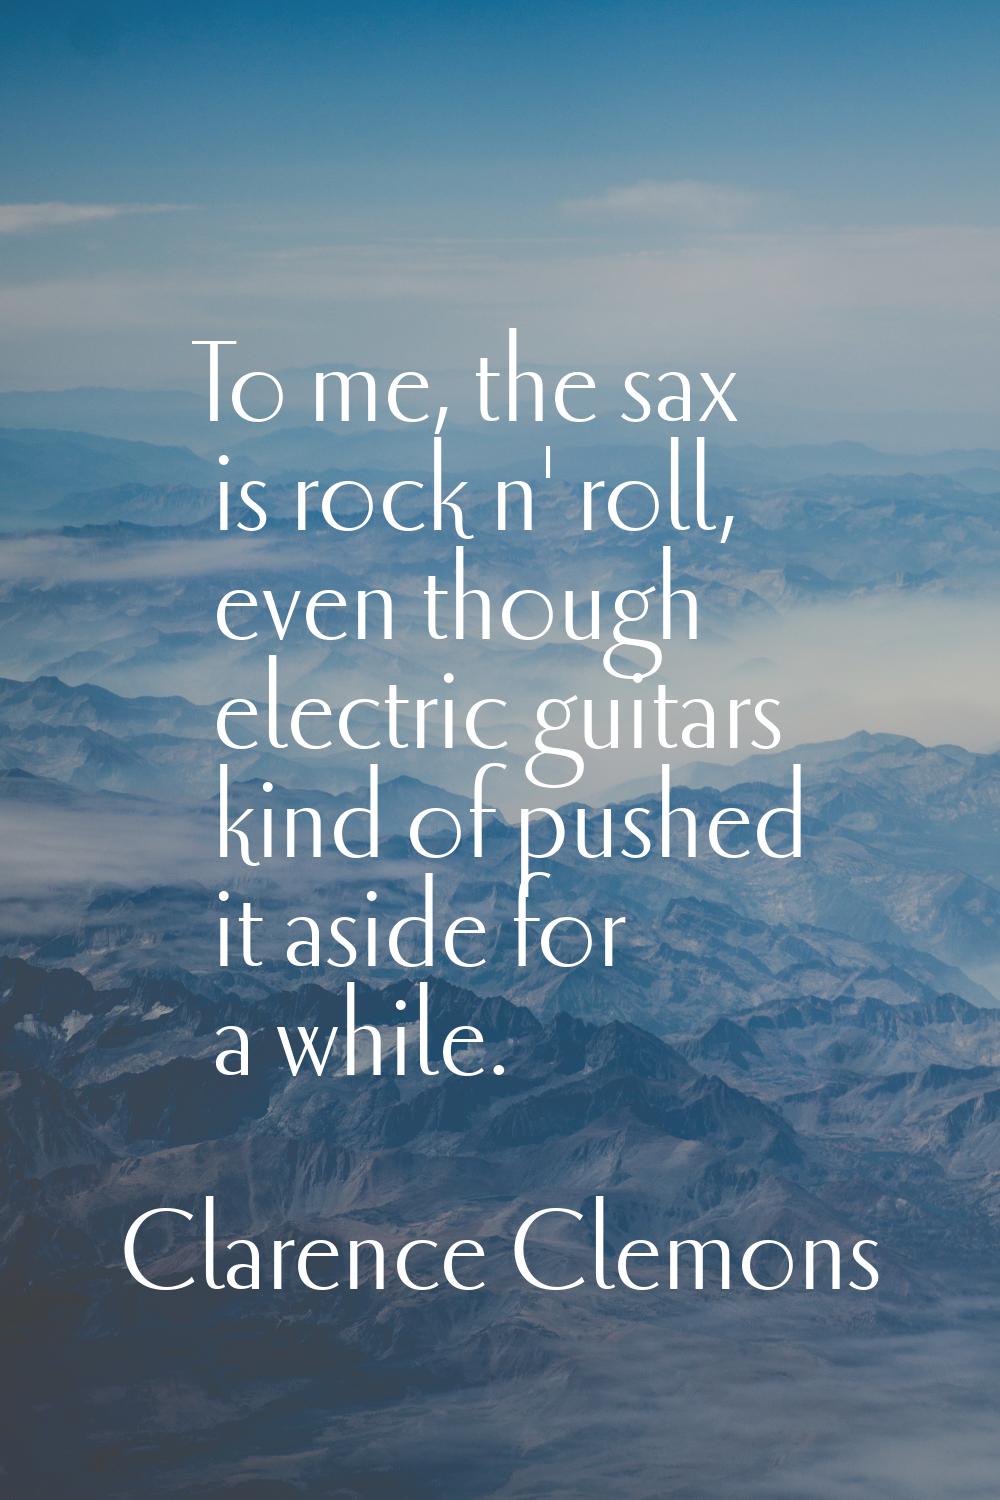 To me, the sax is rock n' roll, even though electric guitars kind of pushed it aside for a while.